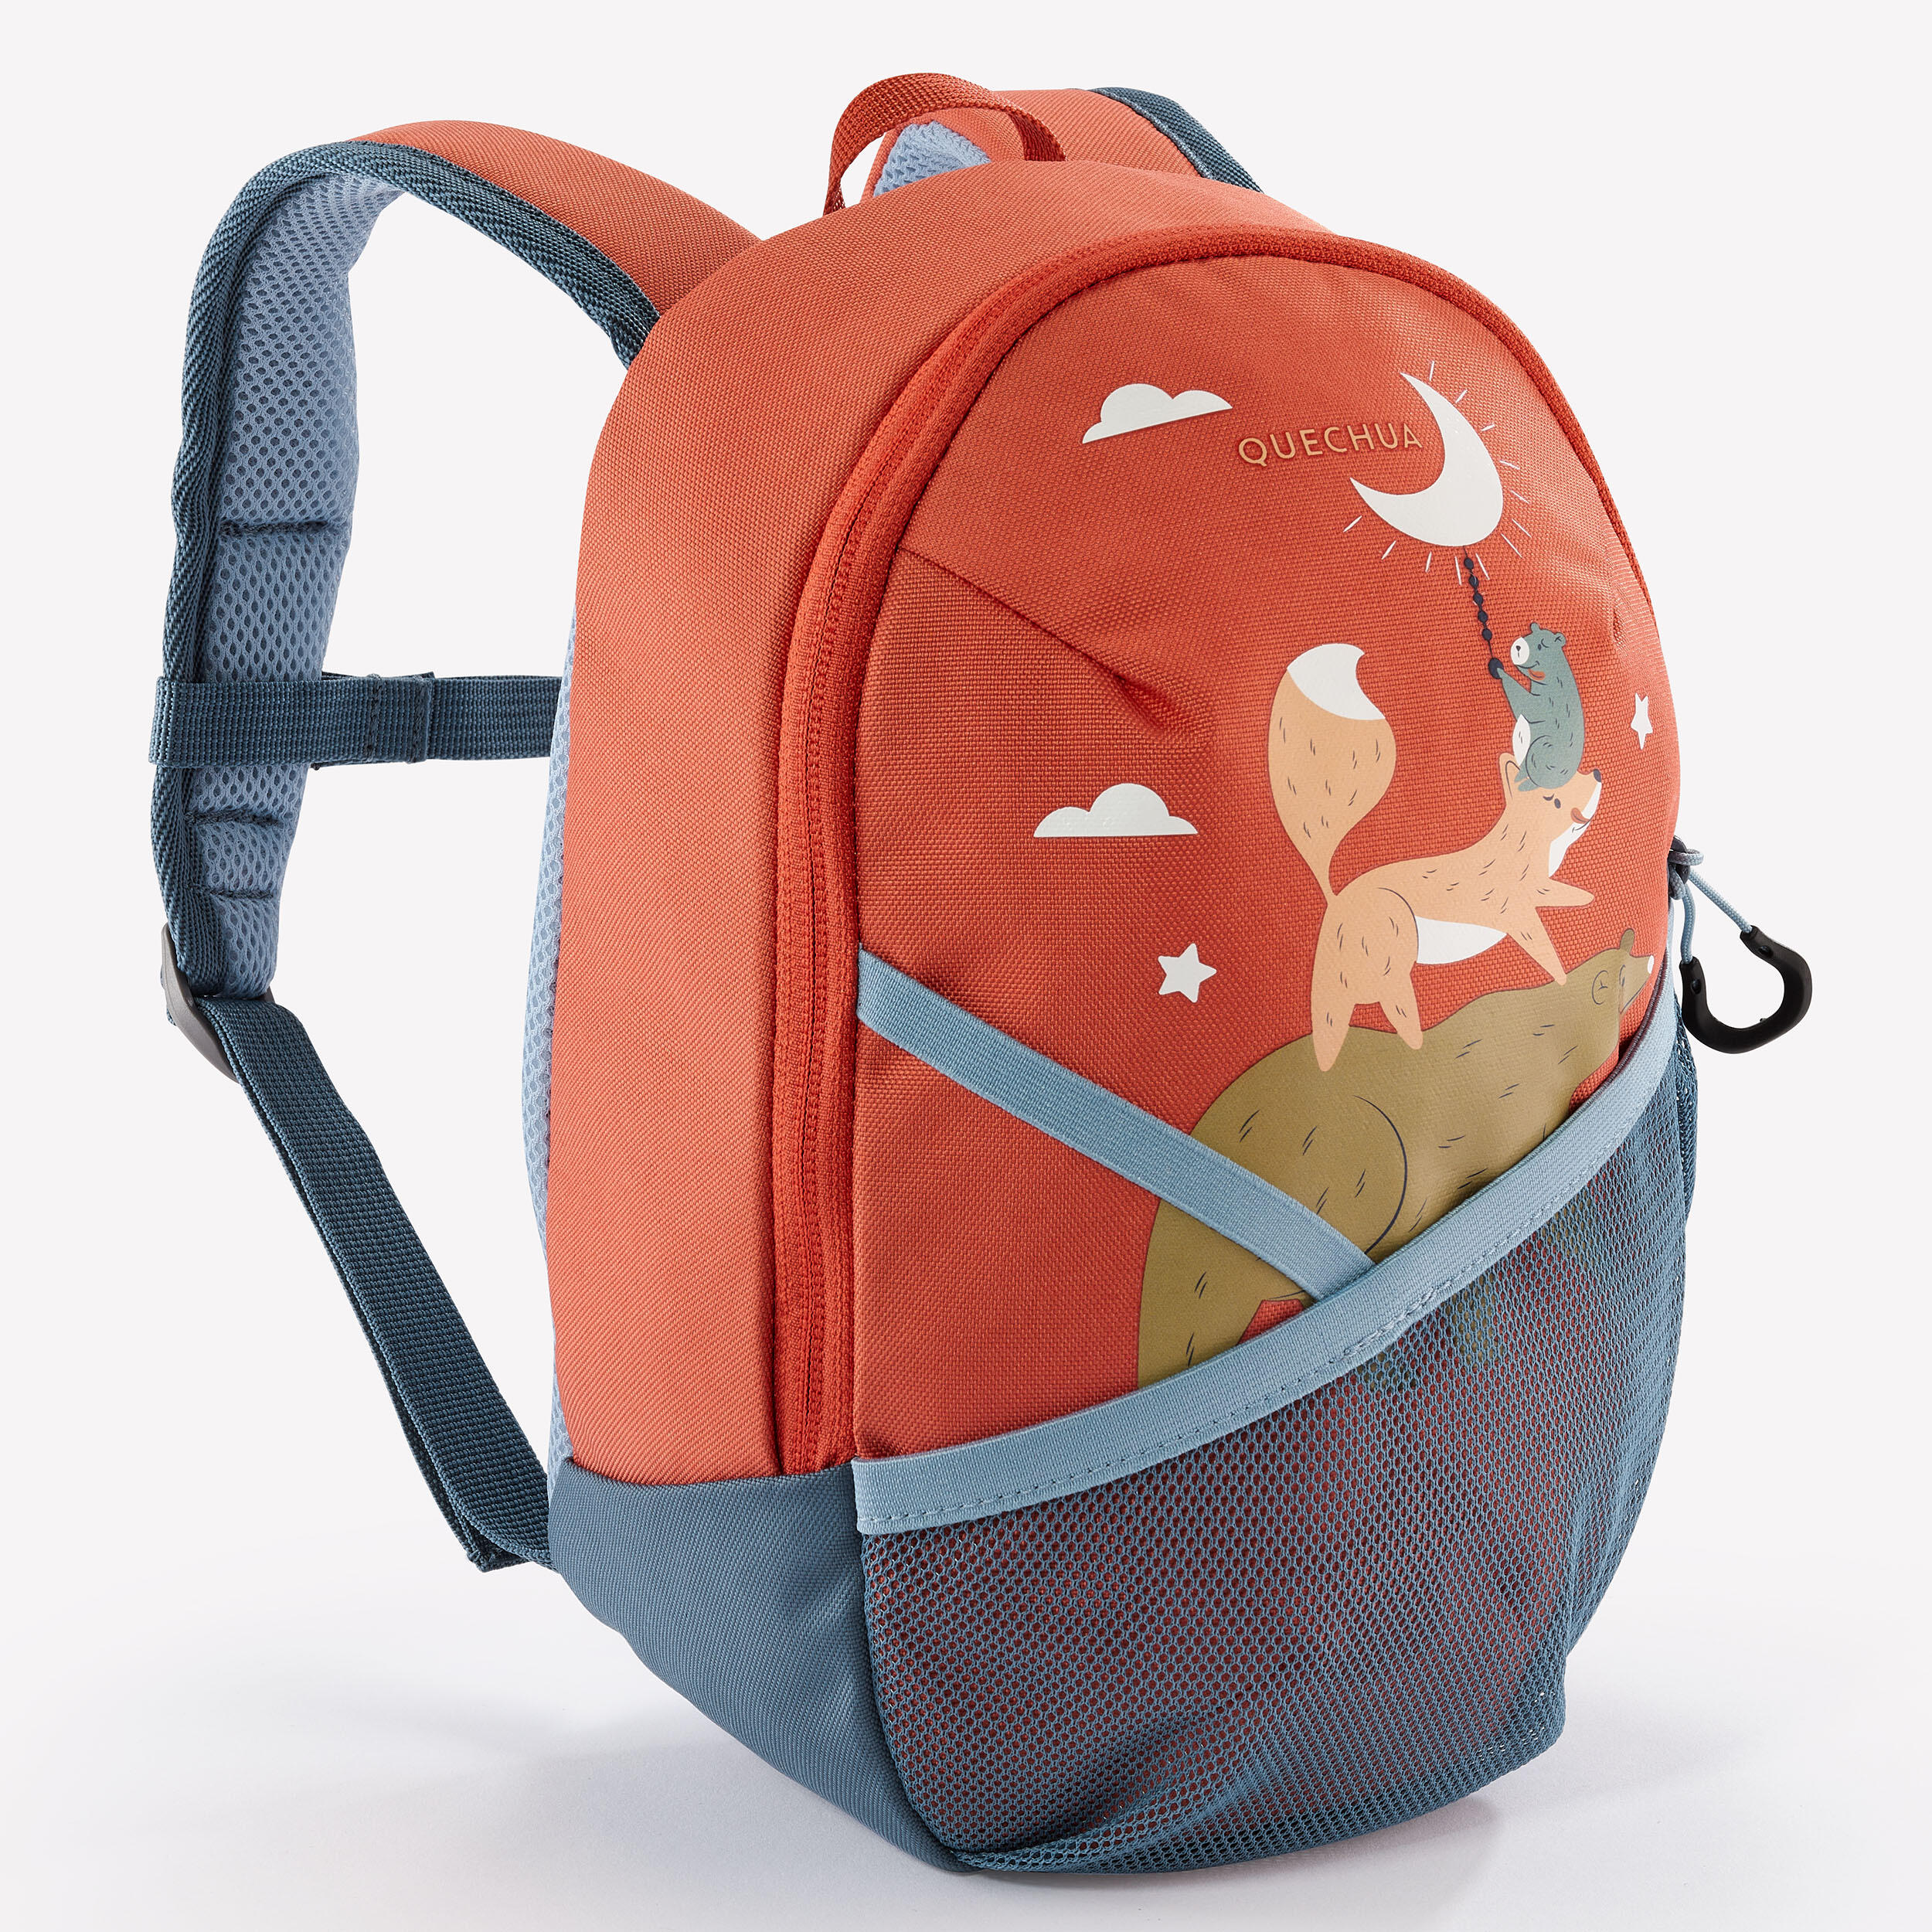 Kids' hiking small backpack 5L - MH100 1/8